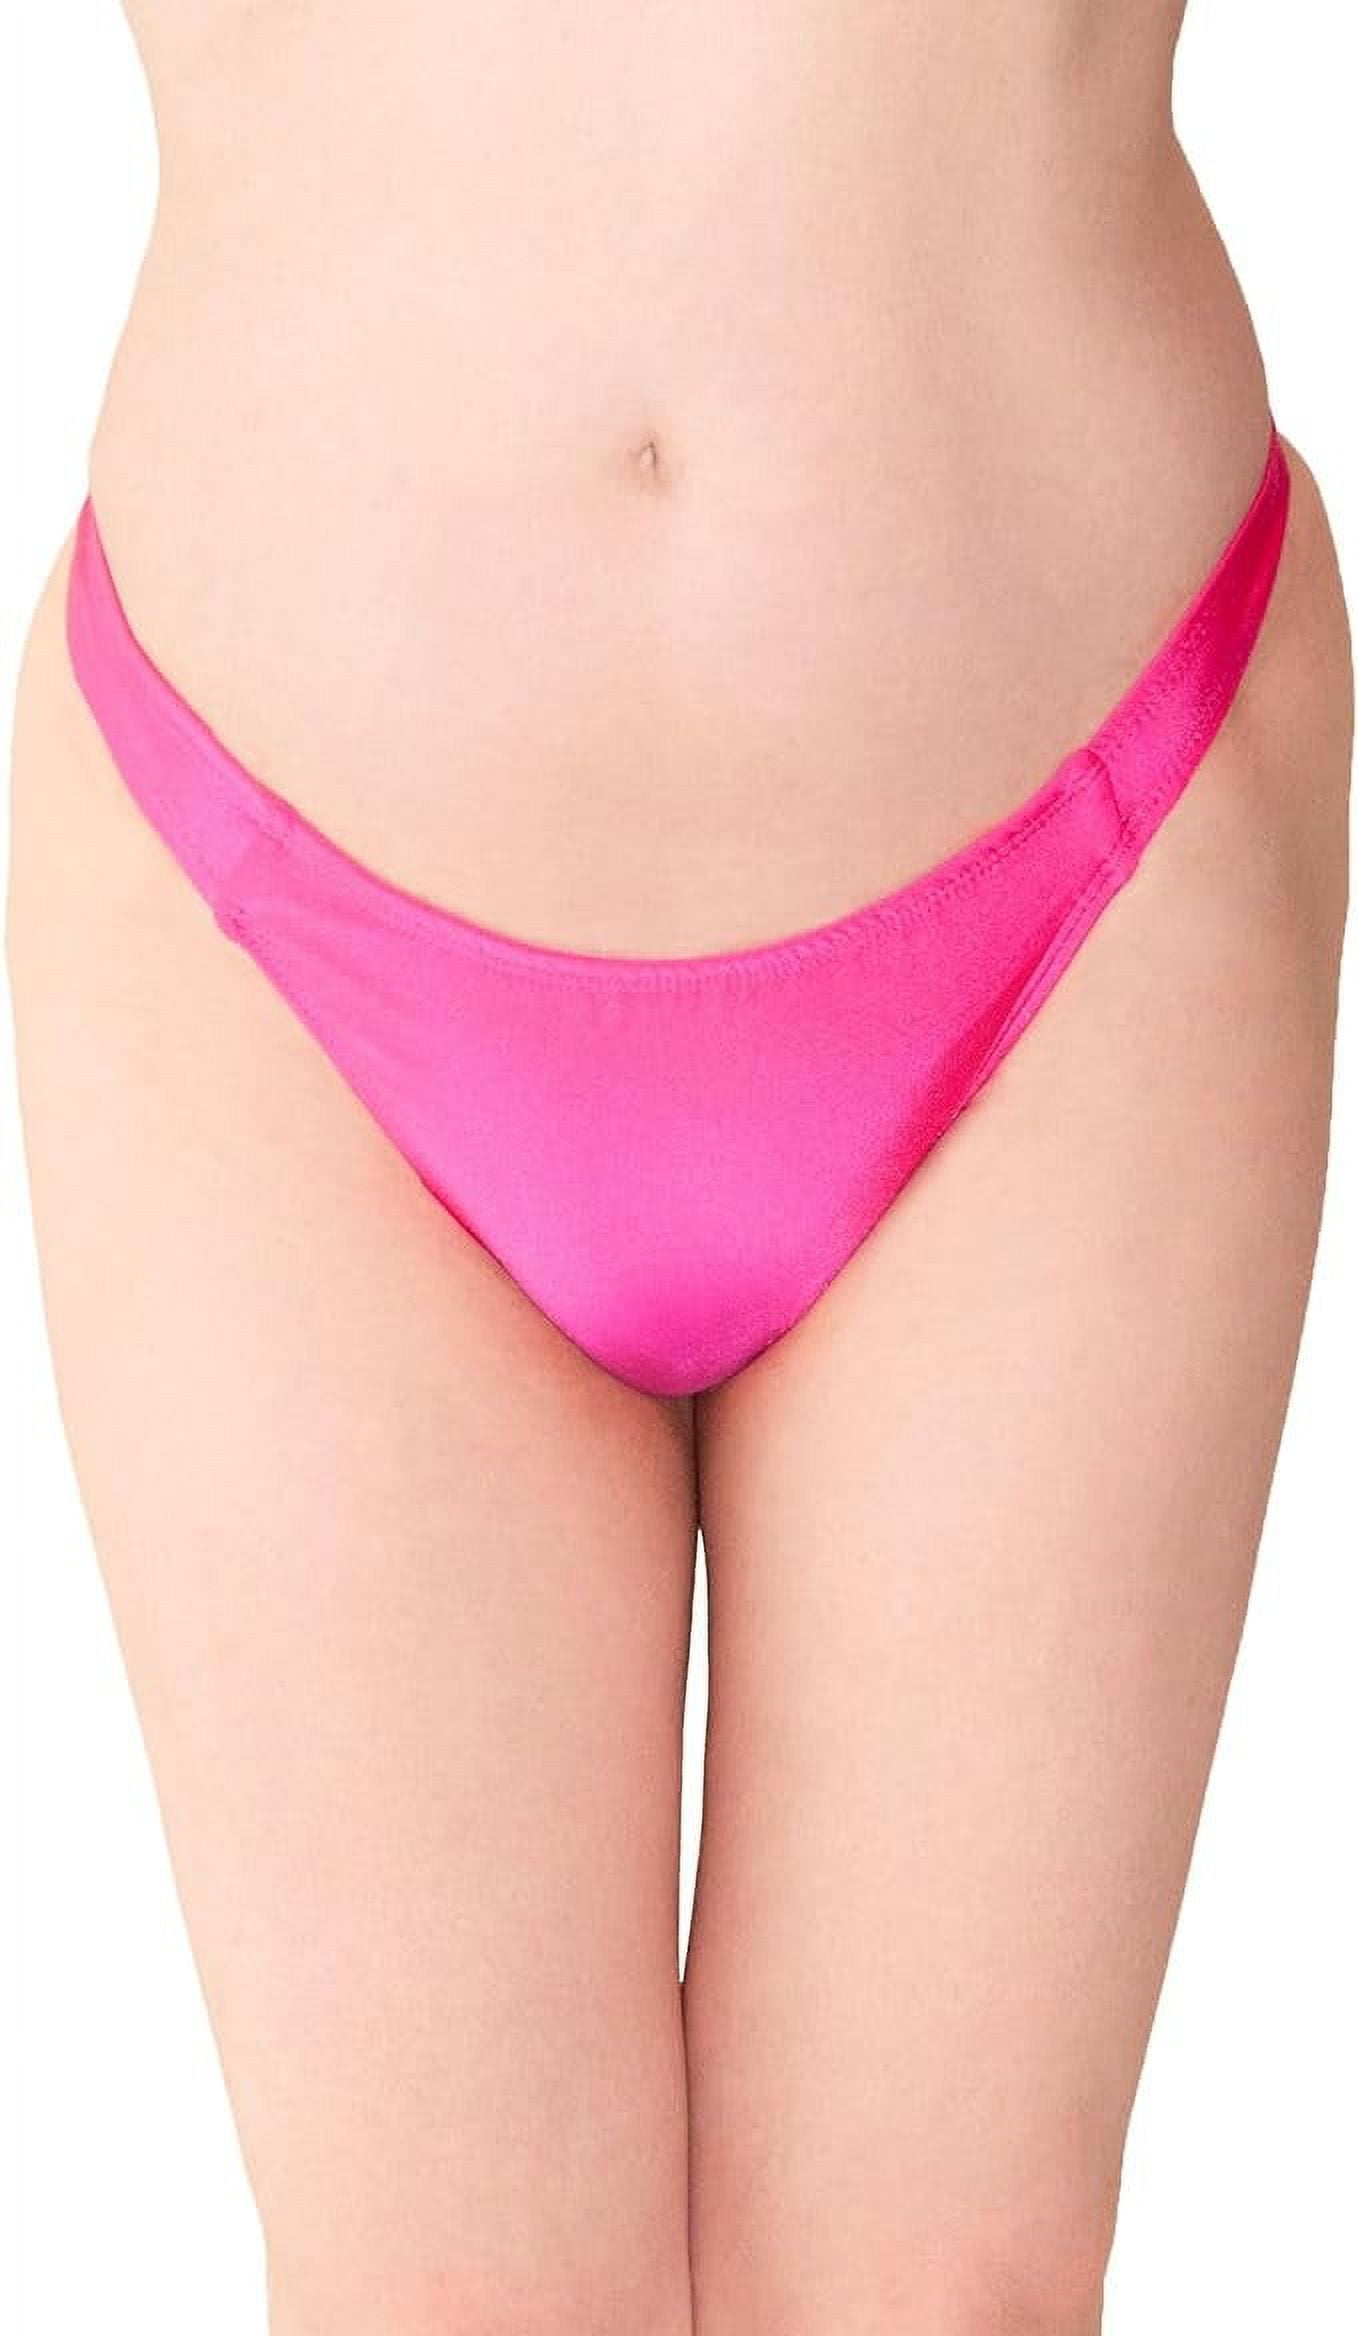 Glamour Boutique's Gaff Thong Underwear Male to Female Tucking Panties X  Large, Pink 